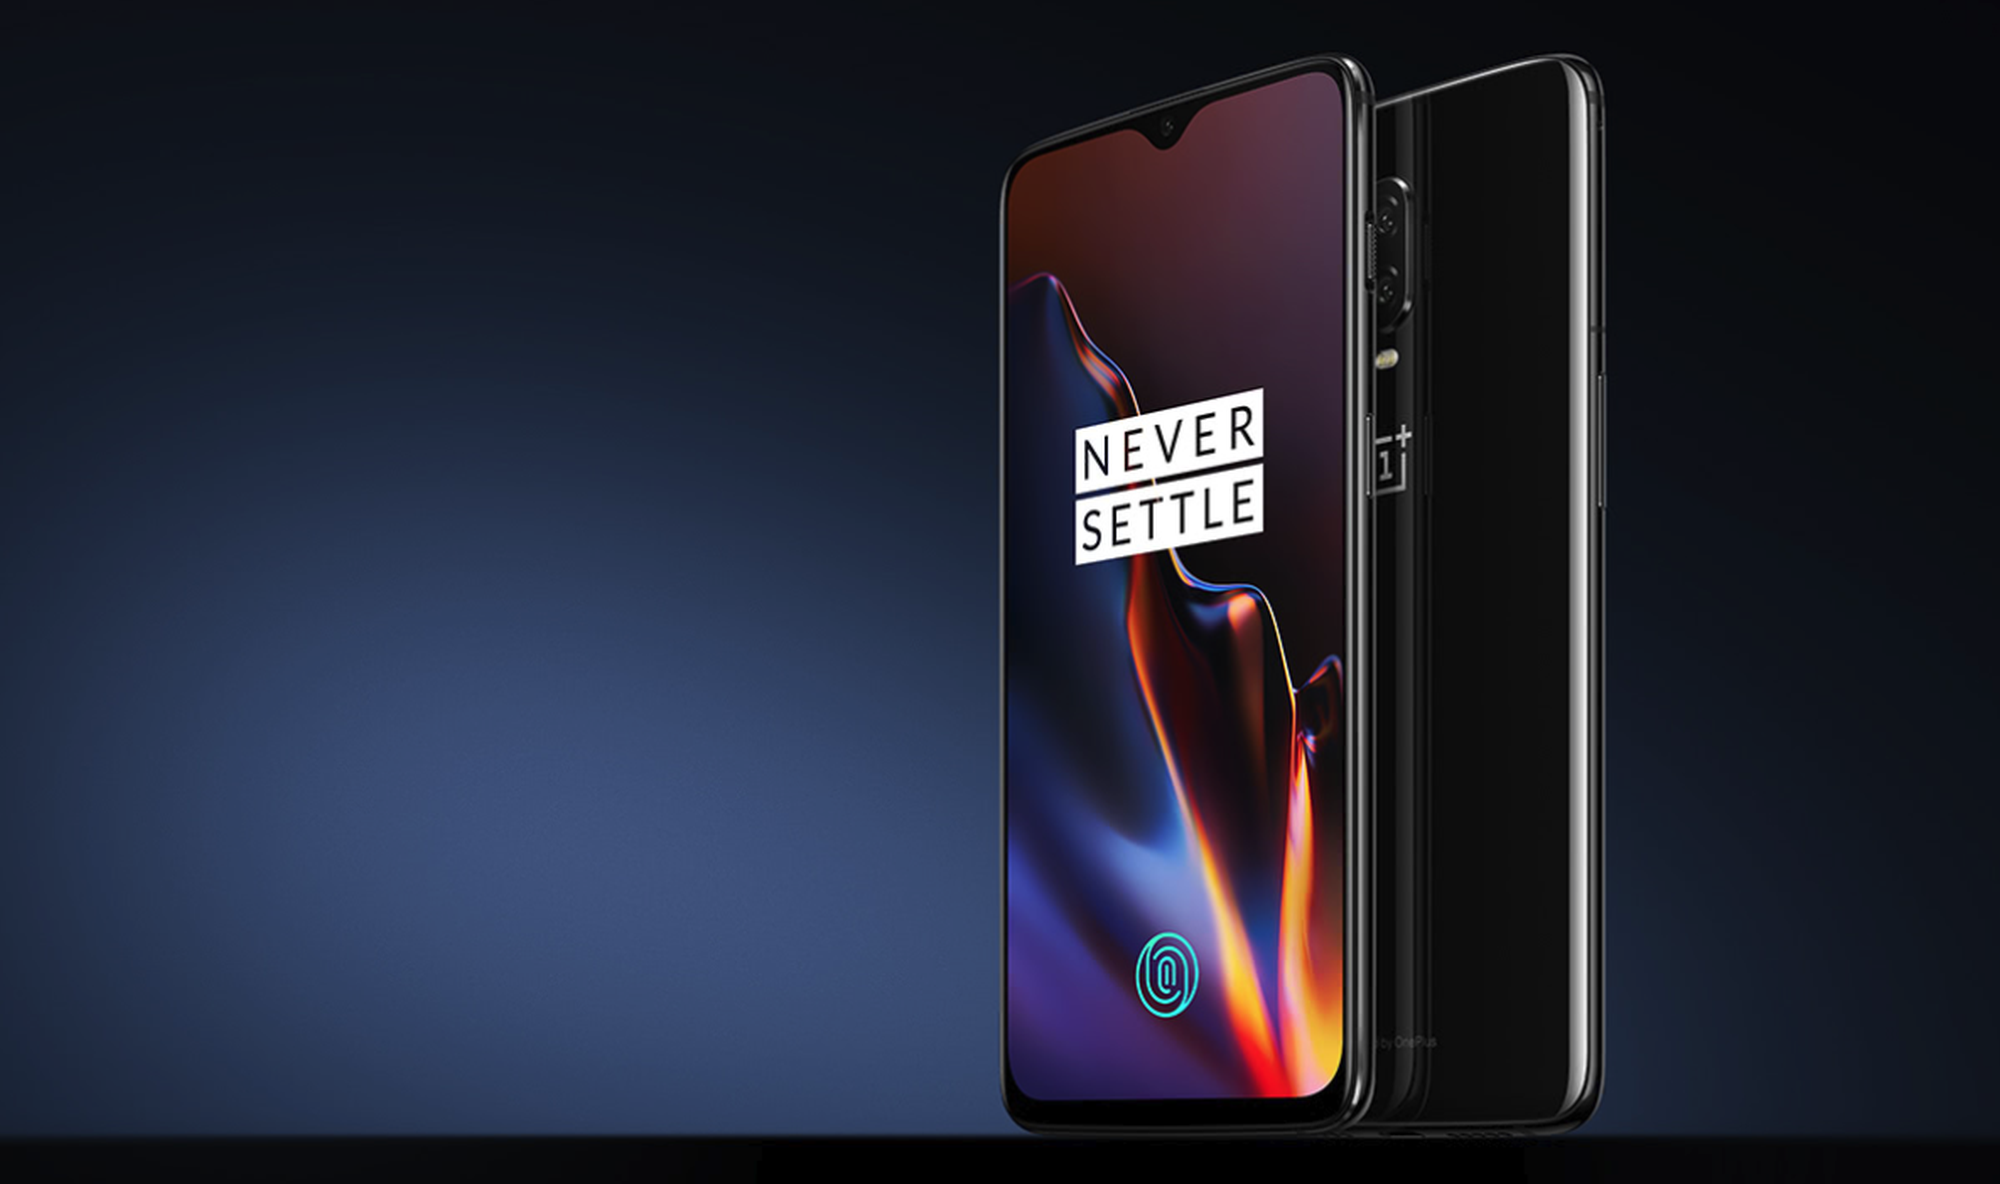 Why buy OnePlus 6T over LG G7